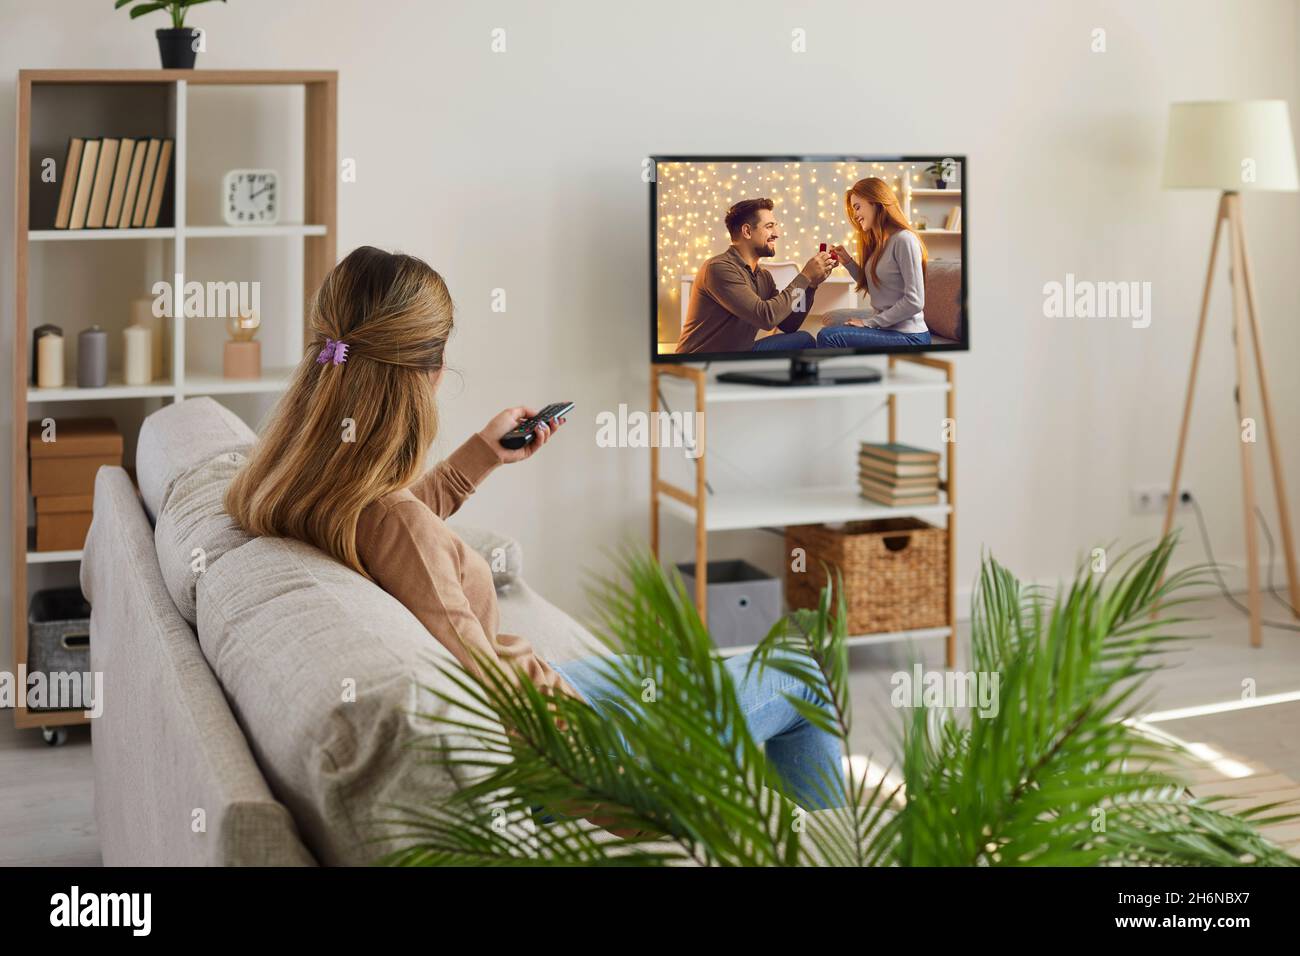 Young woman relax at home watching TV Stock Photo